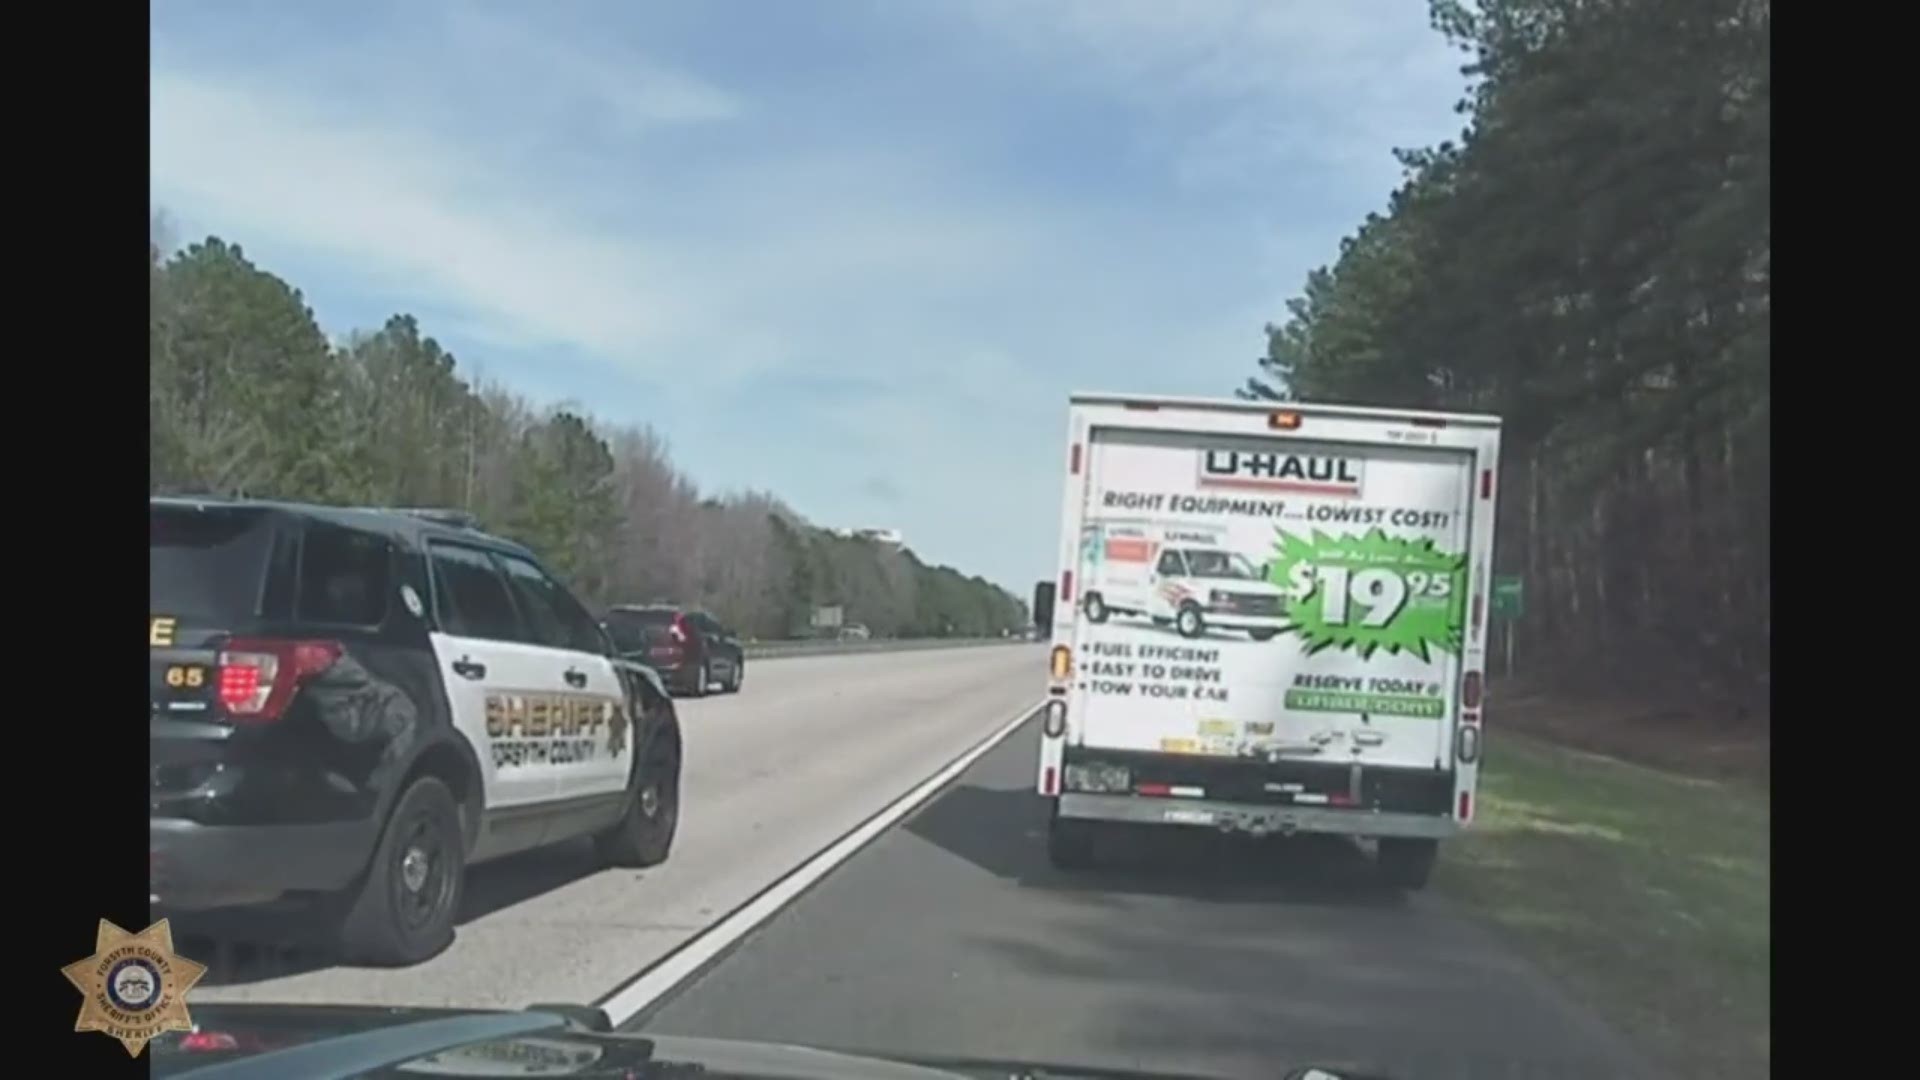 Deputies with the Forsyth County Sheriff's Office arrest a man following a high speed chase in a U-Haul truck.